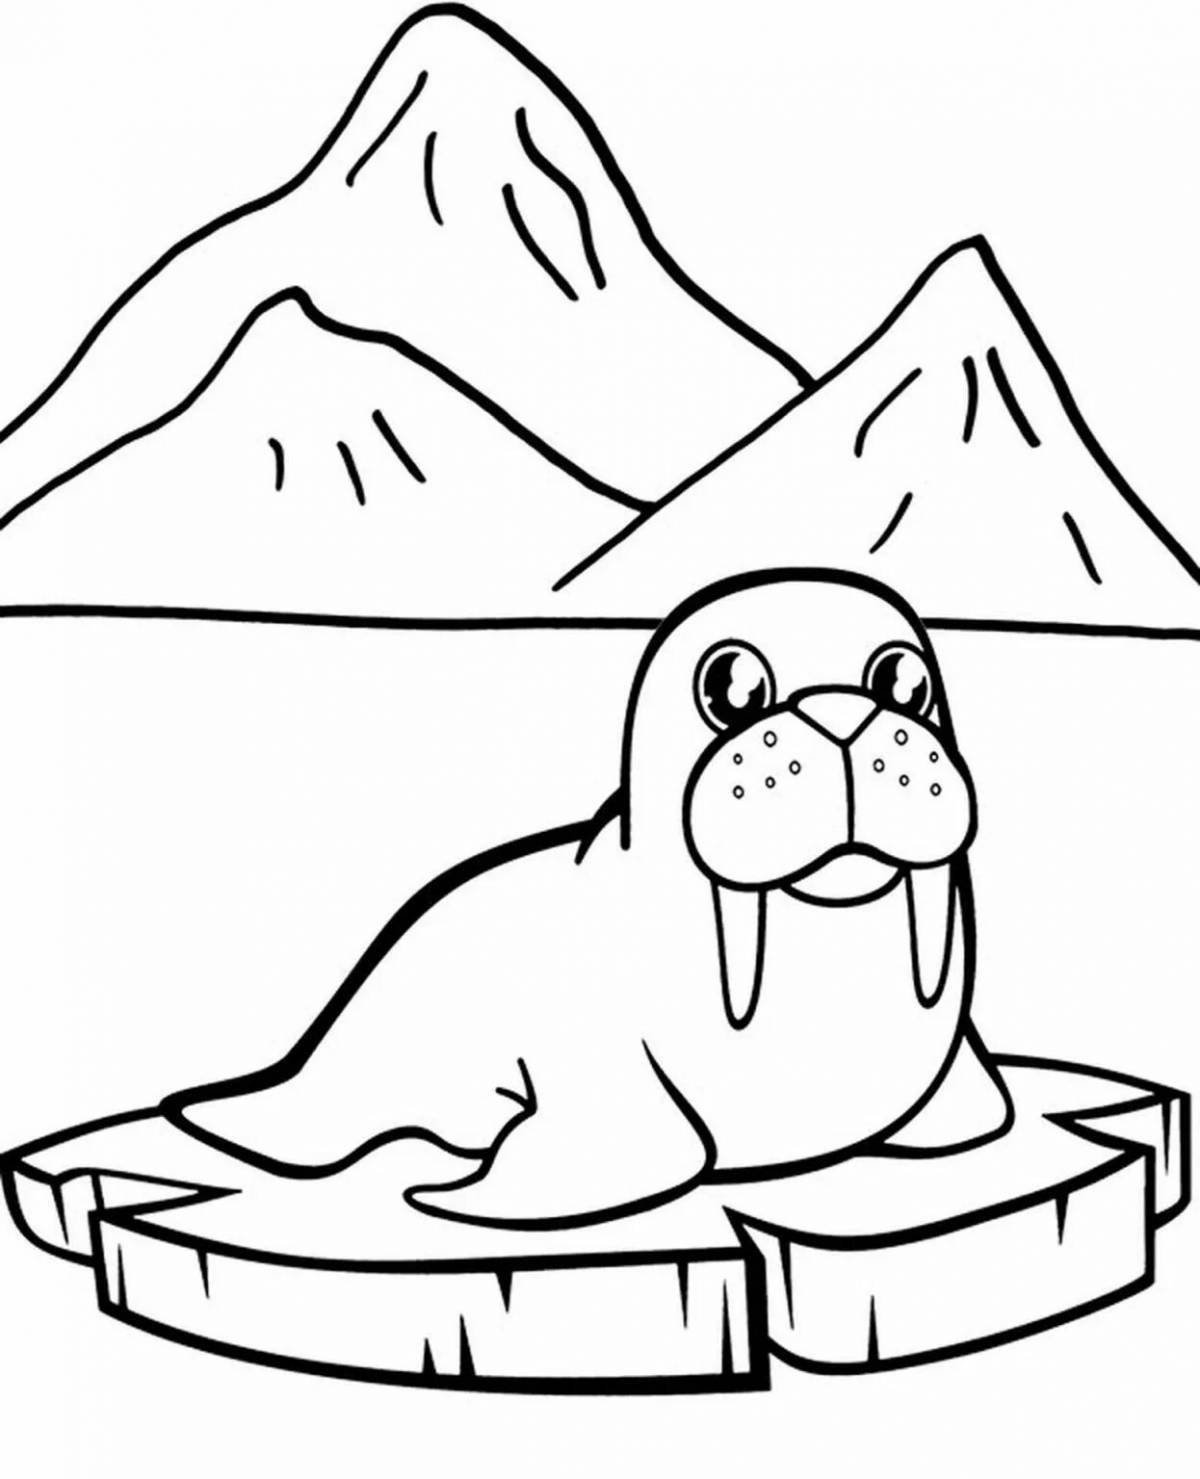 Coloring page for children on an ice float